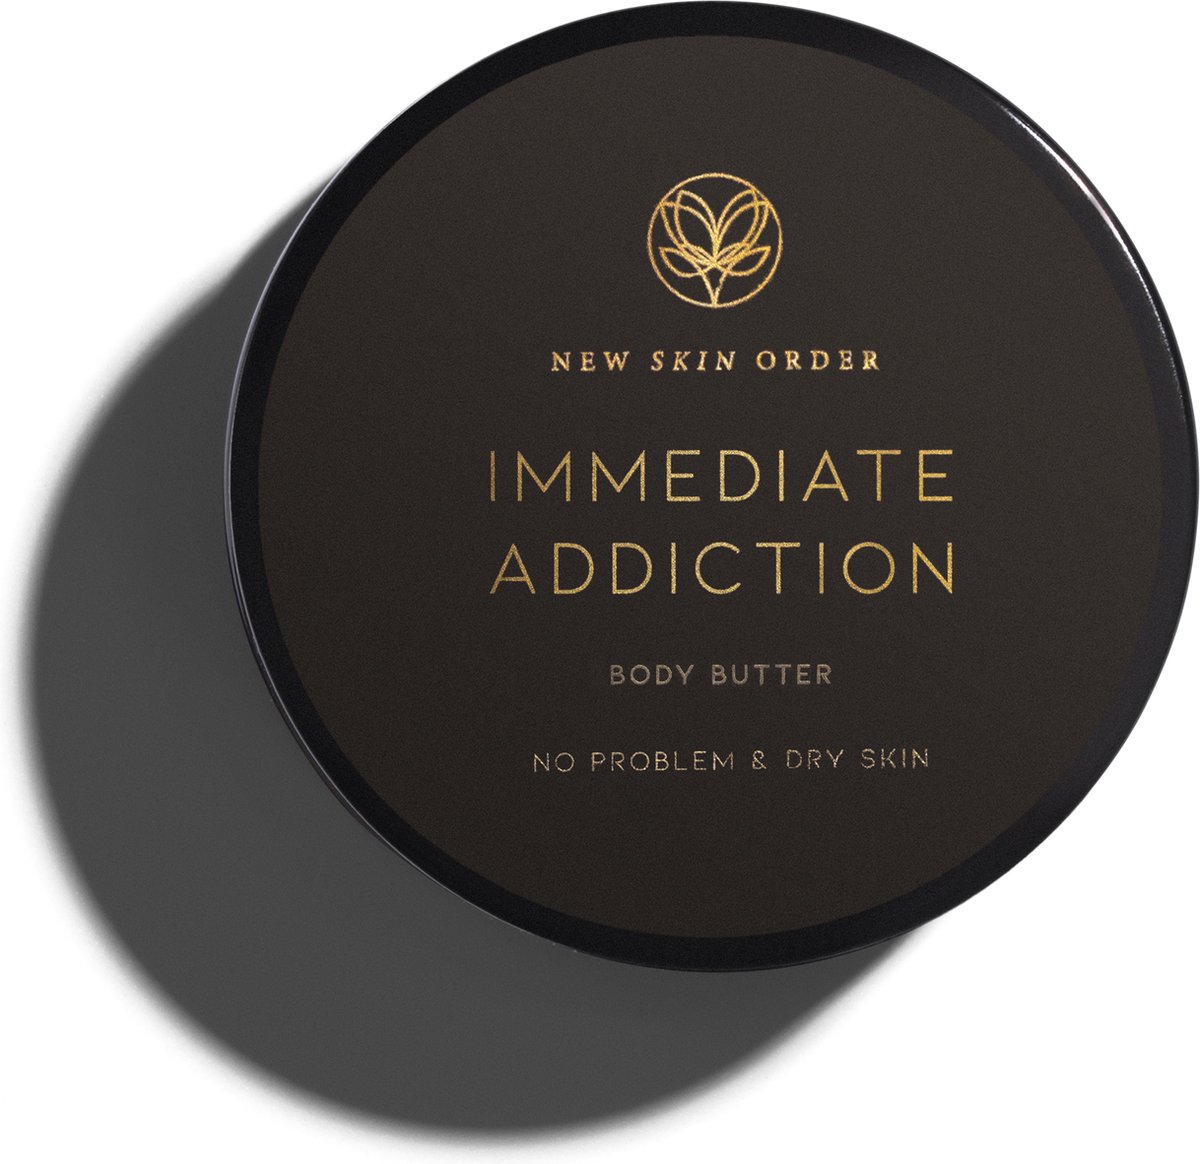 New Skin Order Immidiate Addiction Body butter botanical product